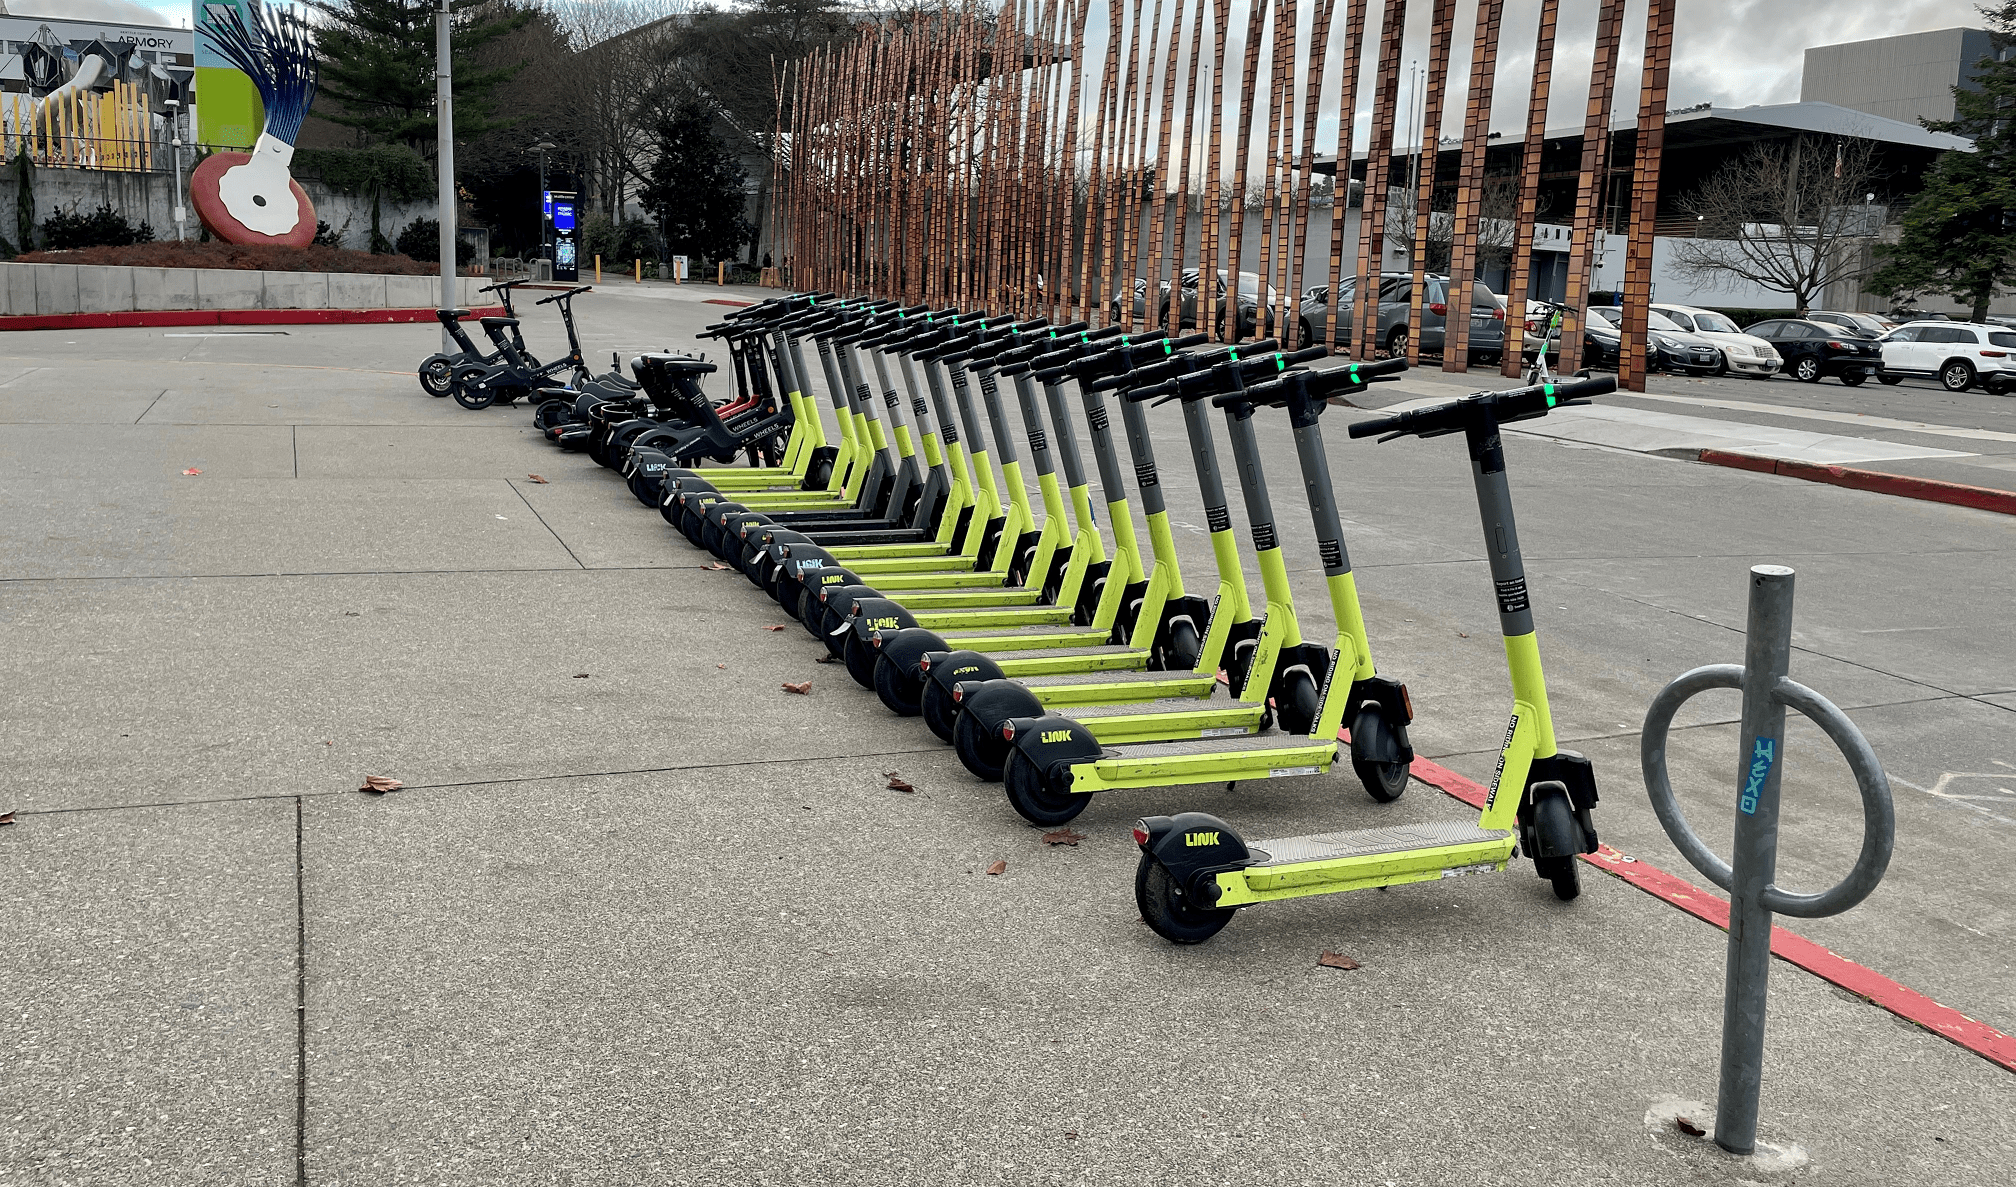 Scooters lined up and ready at the Seattle Center, near the Museum of Pop Culture.